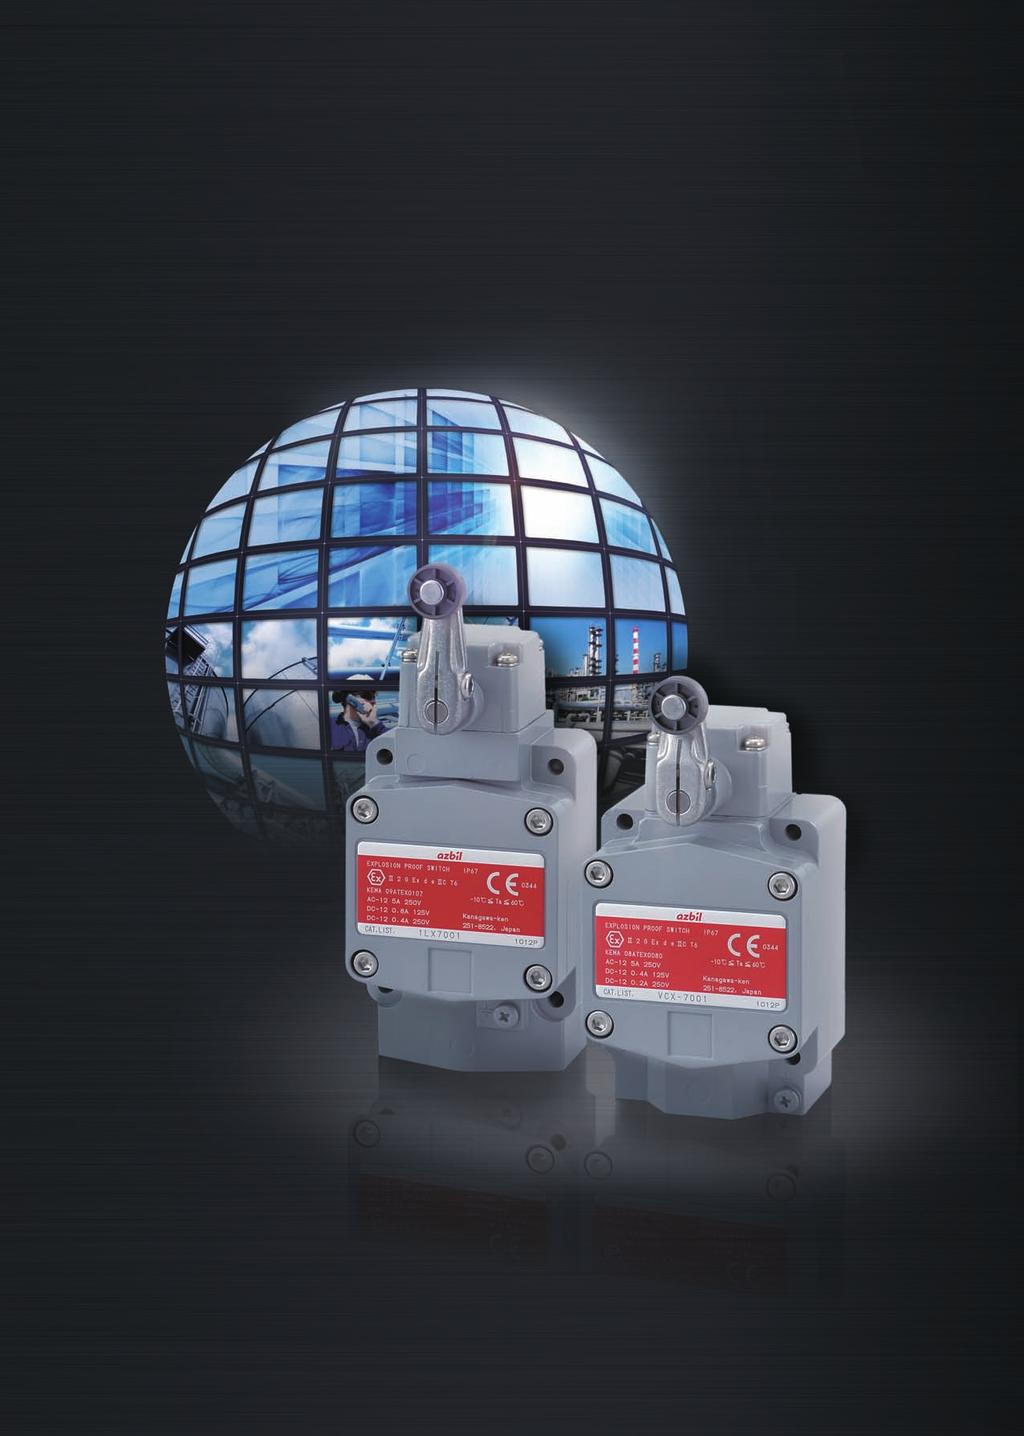 No.CP-PC-6E Explosion-Proof Switches Compliant IEC Standards Vertical Explosion-Proof Switches L X7000 Series -Point Detection